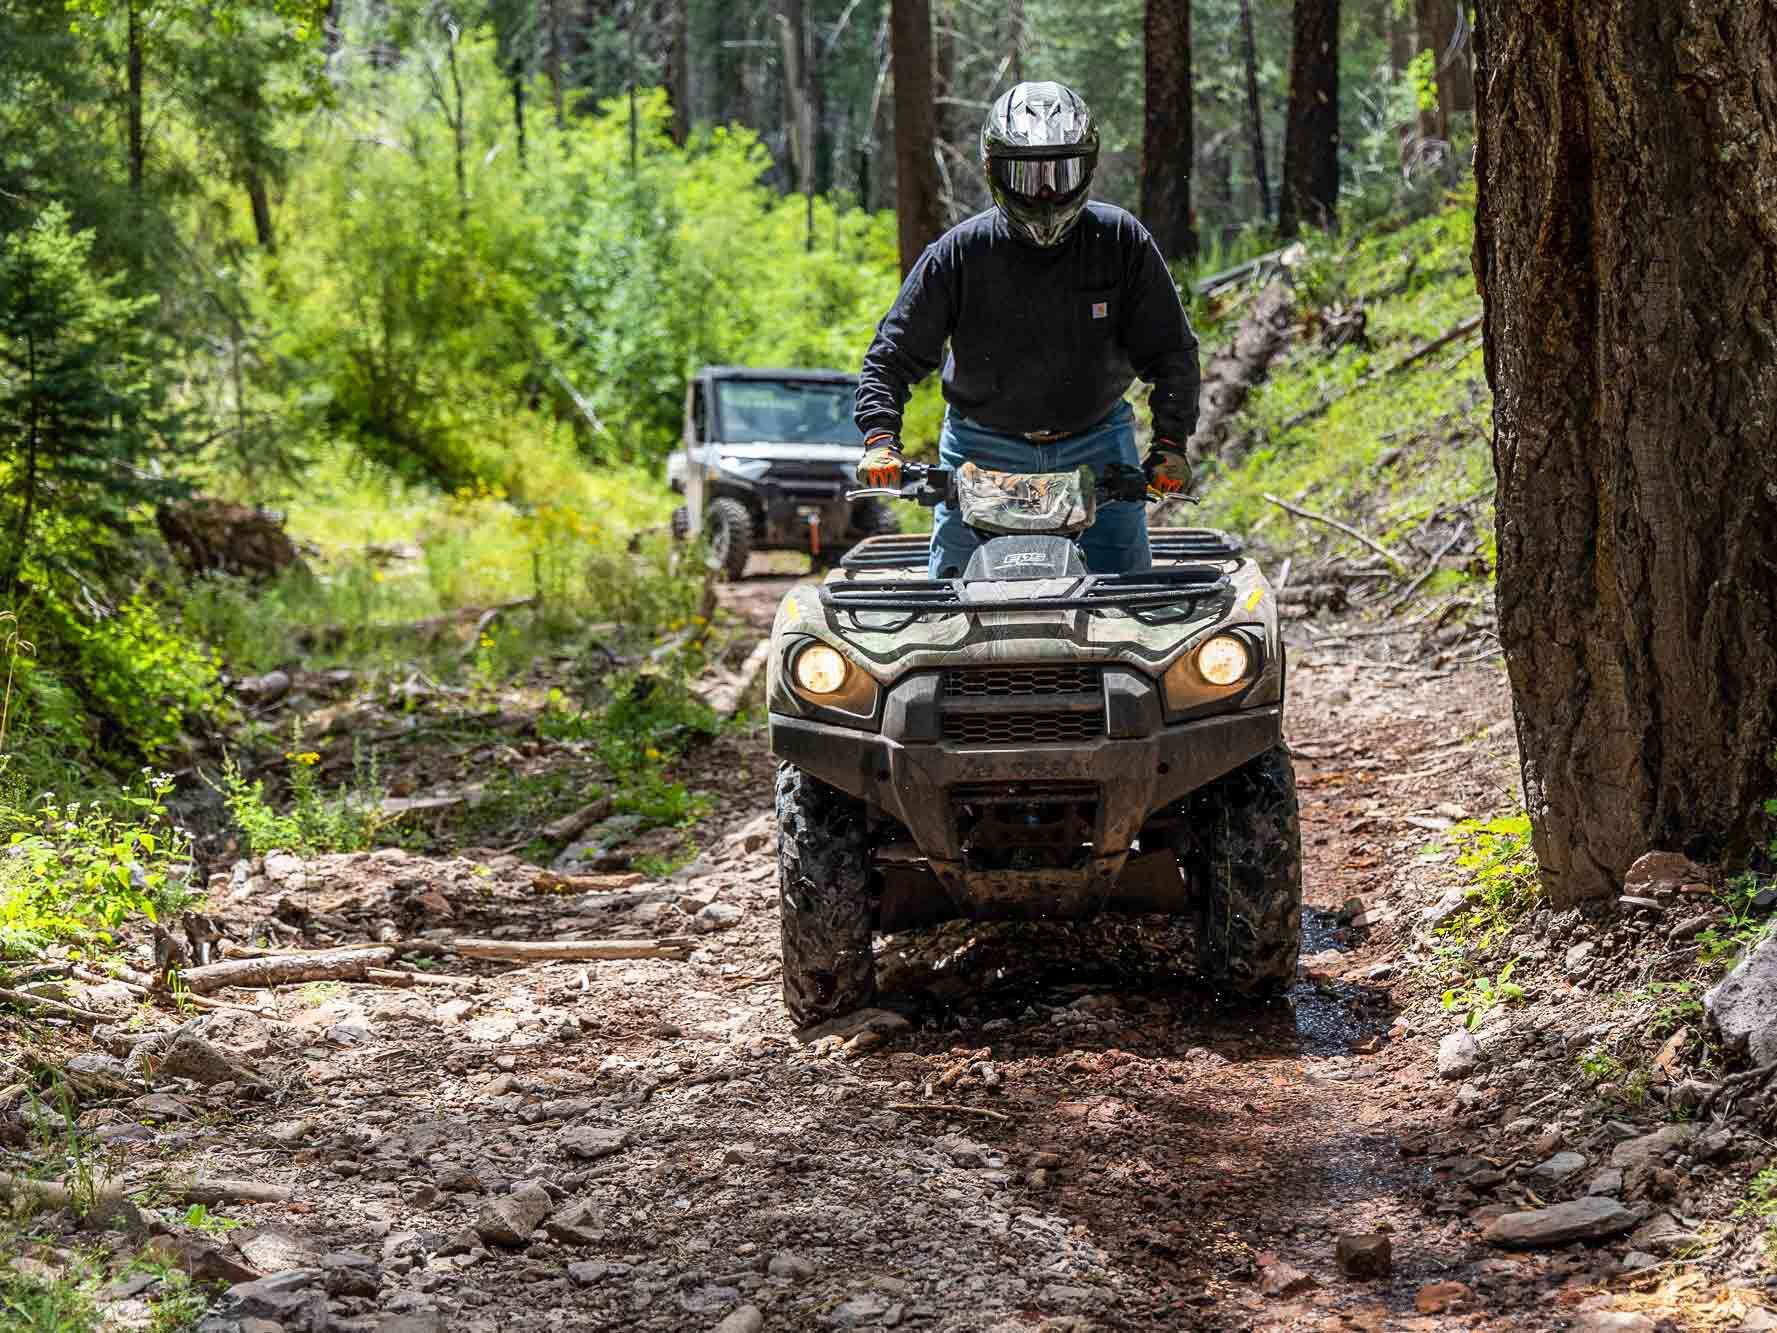 The obvious difference is cost, but there are many other things to consider when choosing between an ATV and a UTV.